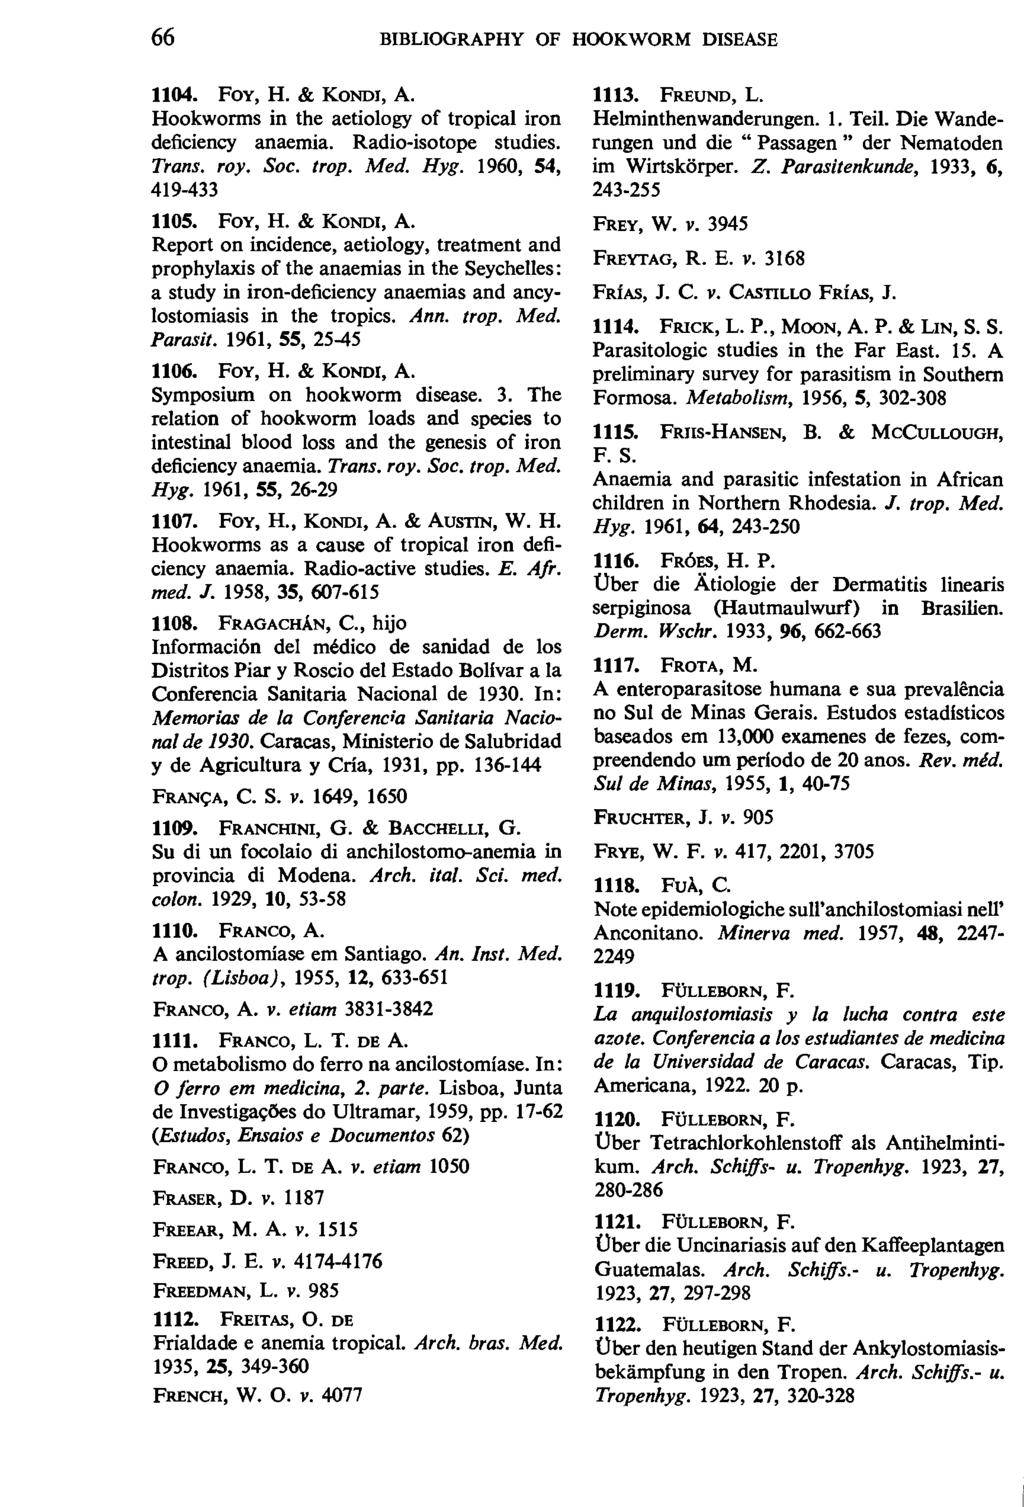 66 BIBLIOGRAPHY OF HOOKWORM DISEASE 1104. FoY, H. & KONDI, A. Hookworms in the aetiology of tropical iron deficiency anaemia. Radio-isotope studies. Trans. roy. Soc. trop. Med. Hyg.